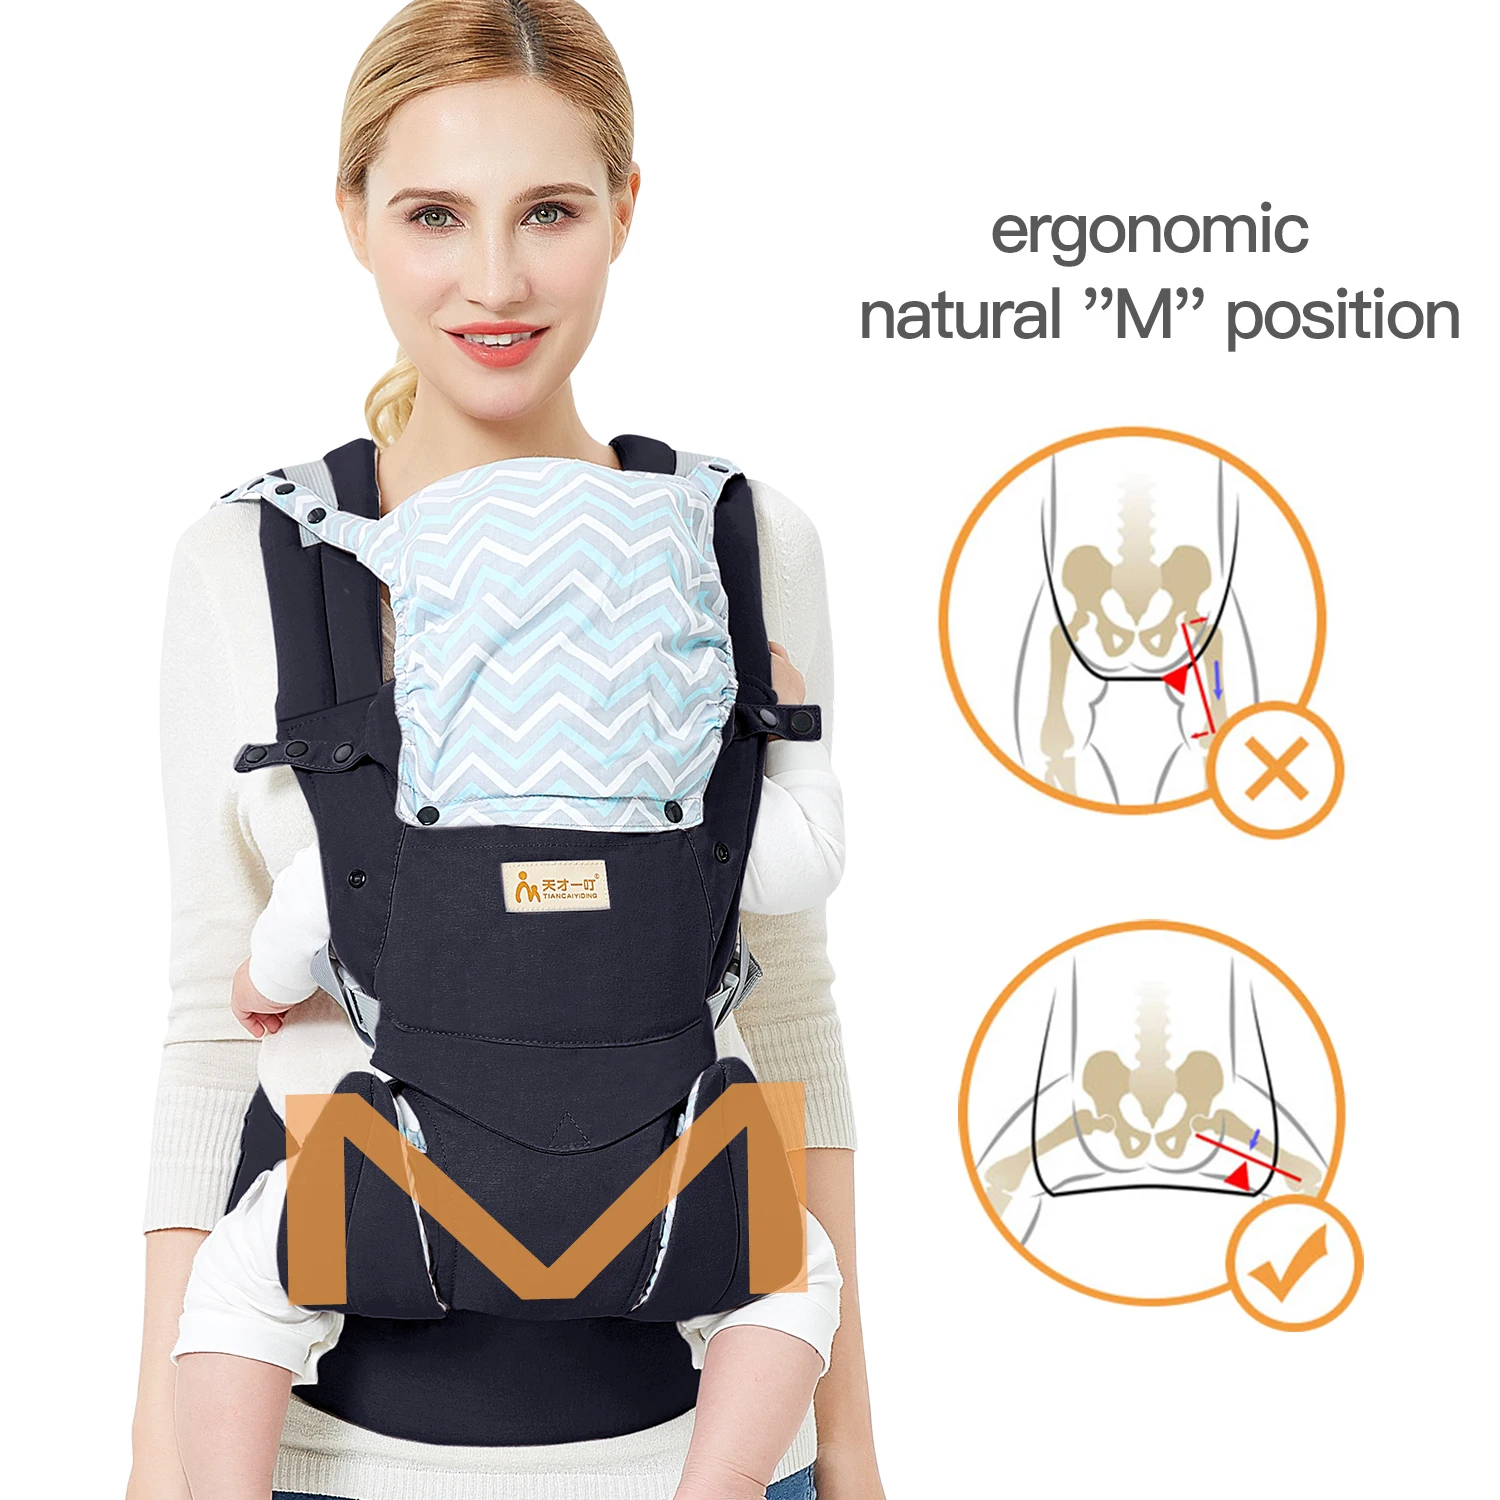 купить Advanced 4-in-1 Carrier - Ergonomic, Convertible, Face-In And Face-out Front And Back Carry For Newborns And Older Babies в интернет-магазине